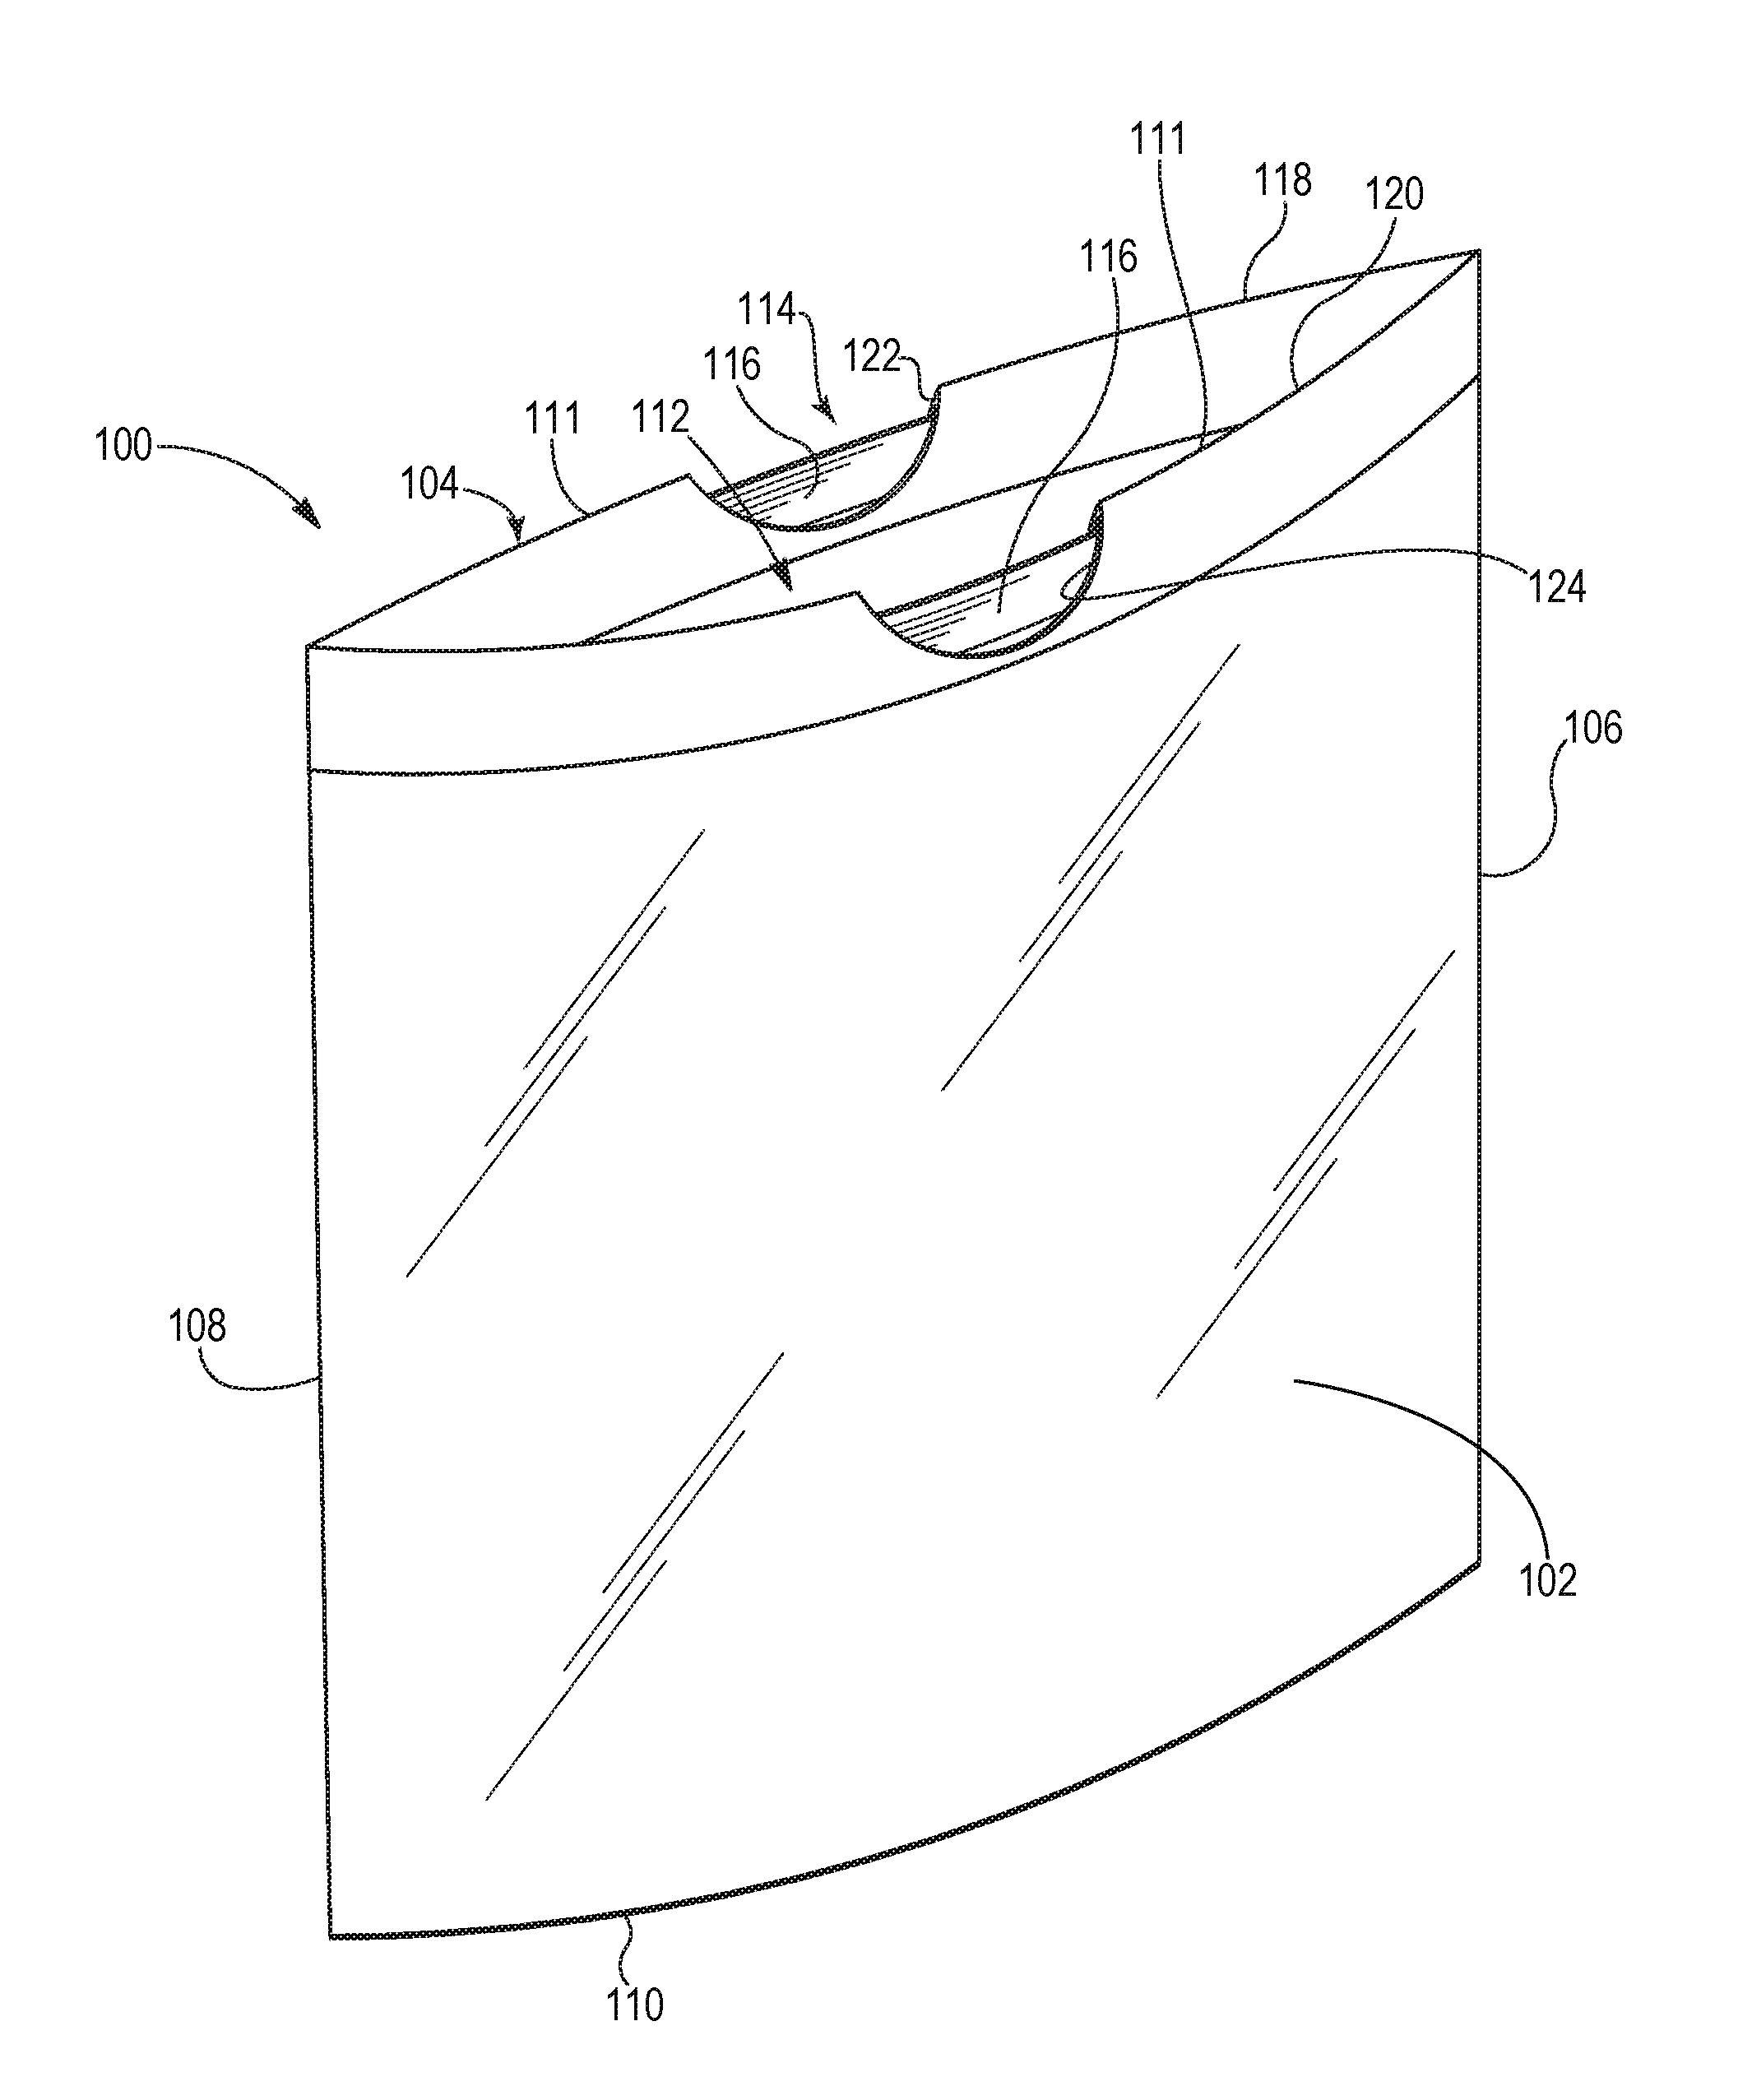 Multi-layer thermoplastic films and bags with enhanced odor control and methods of making the same